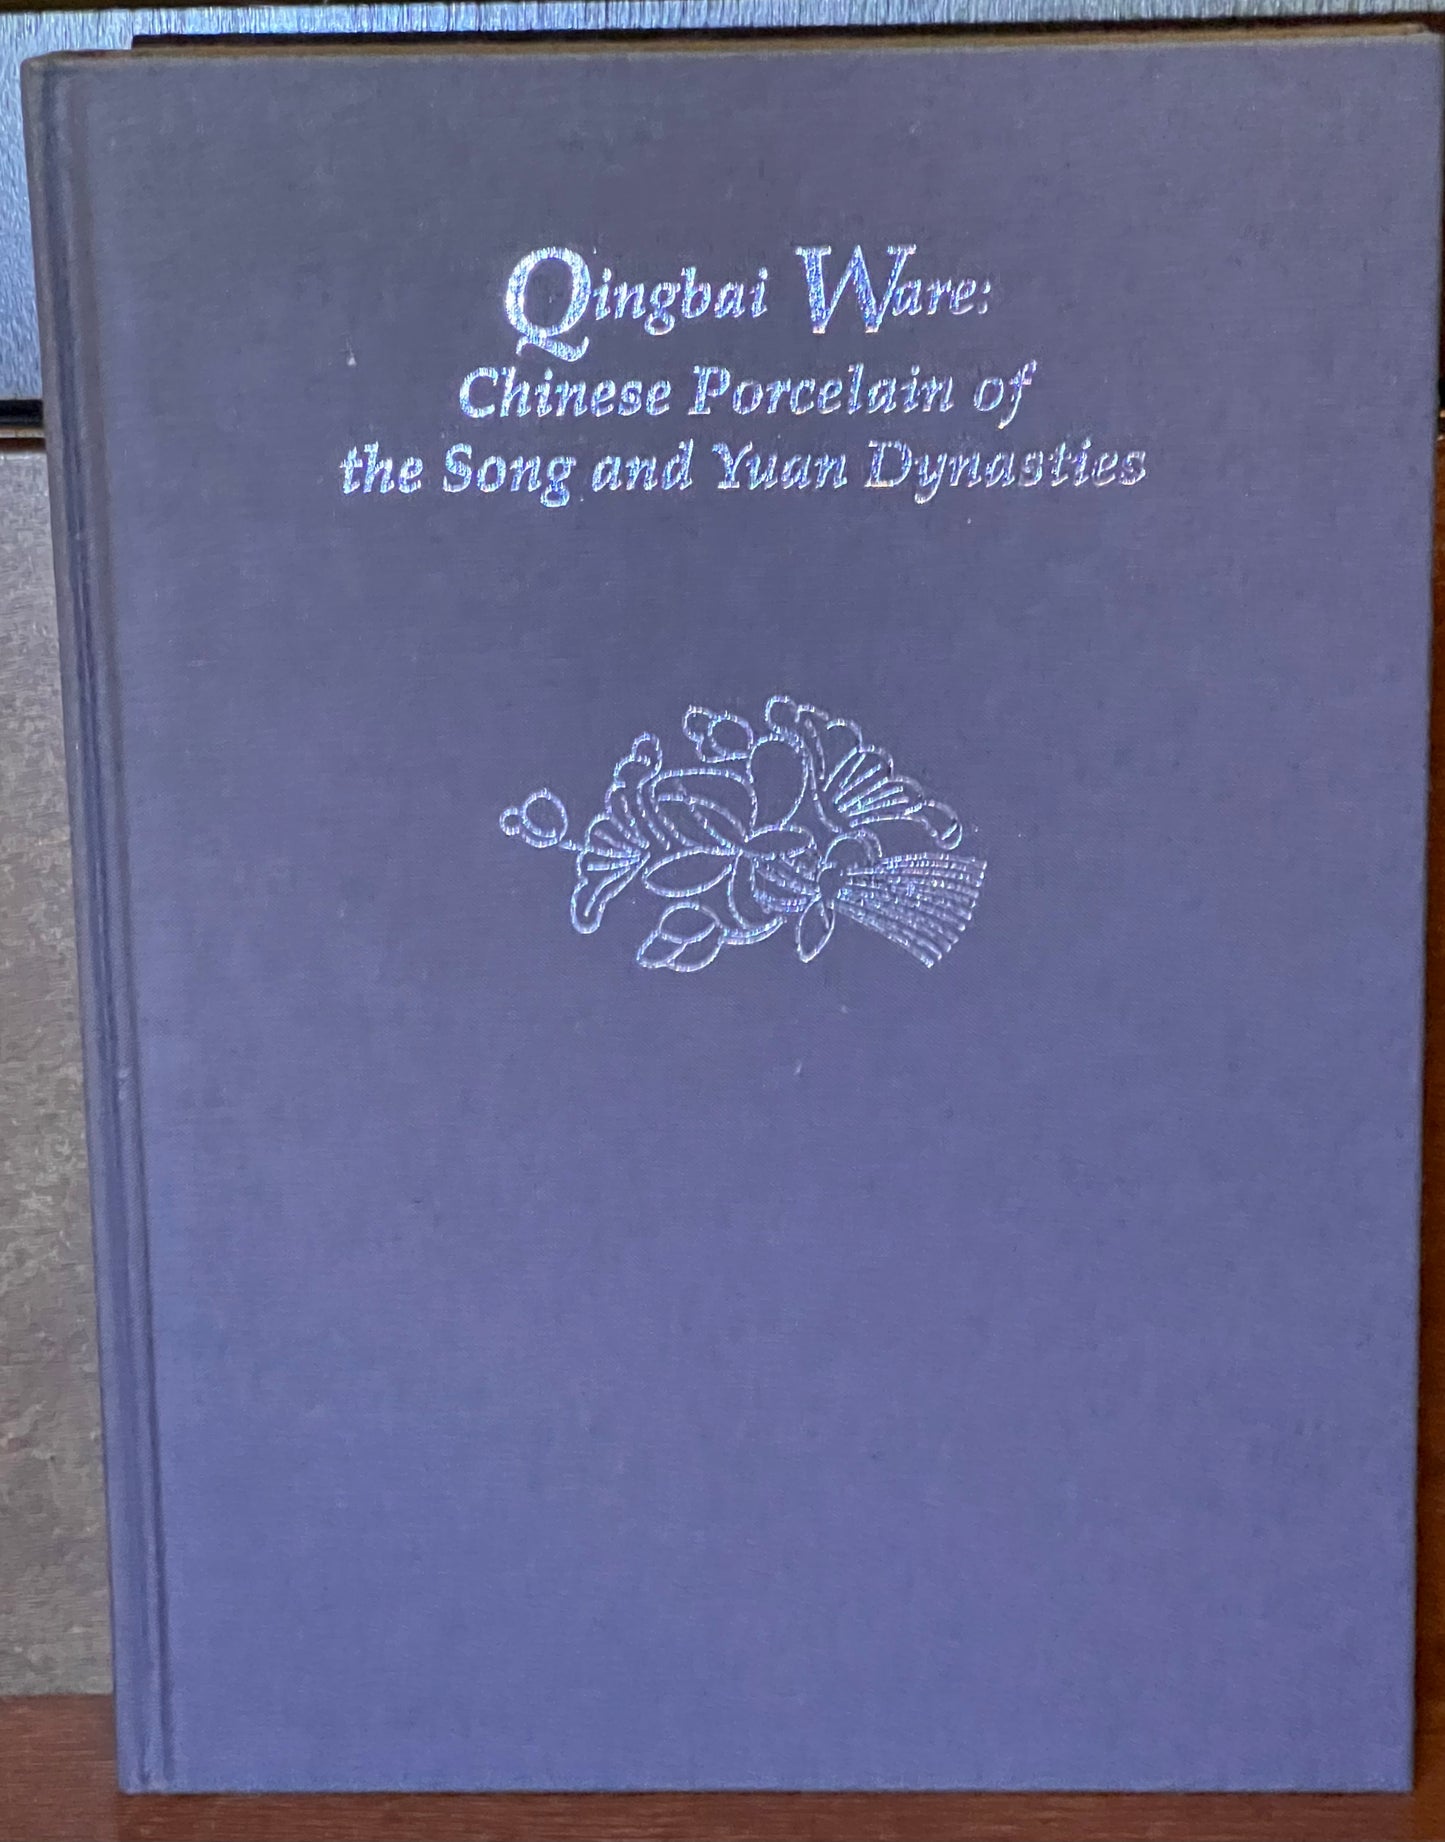 Qingbai Ware: Chinese Porcelain of the Song and Yuan Dynasties Hardcover